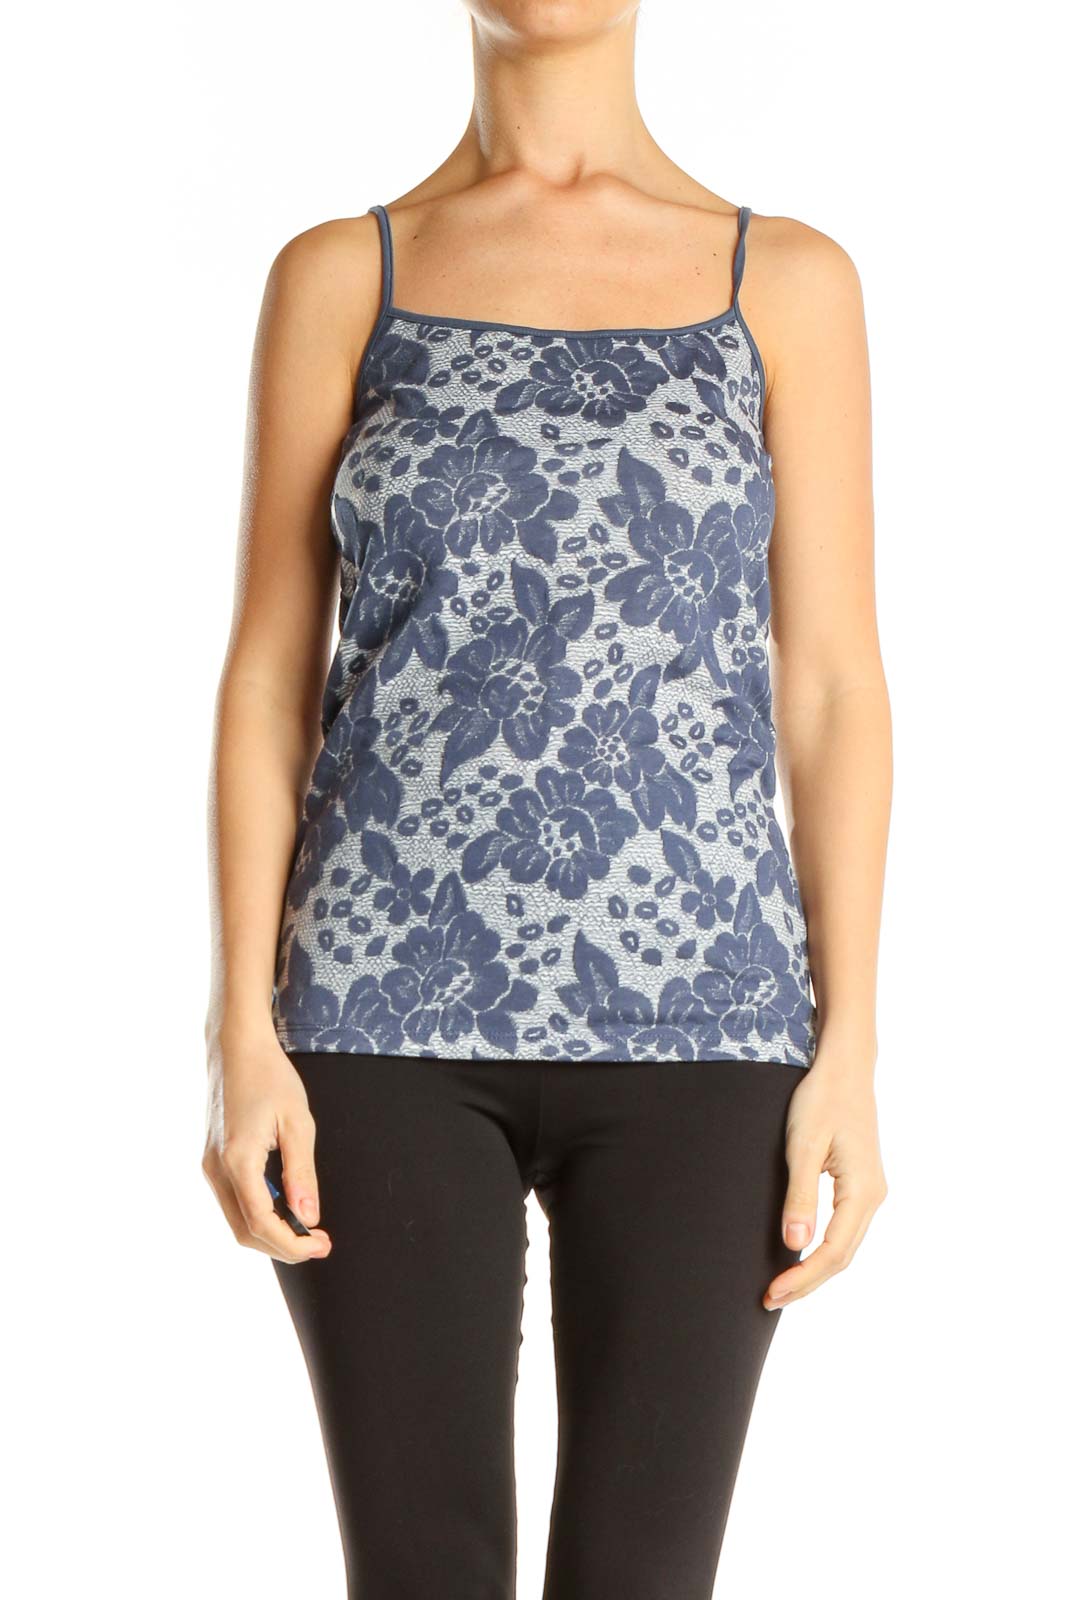 Blue Floral Print Casual Tank Top Front